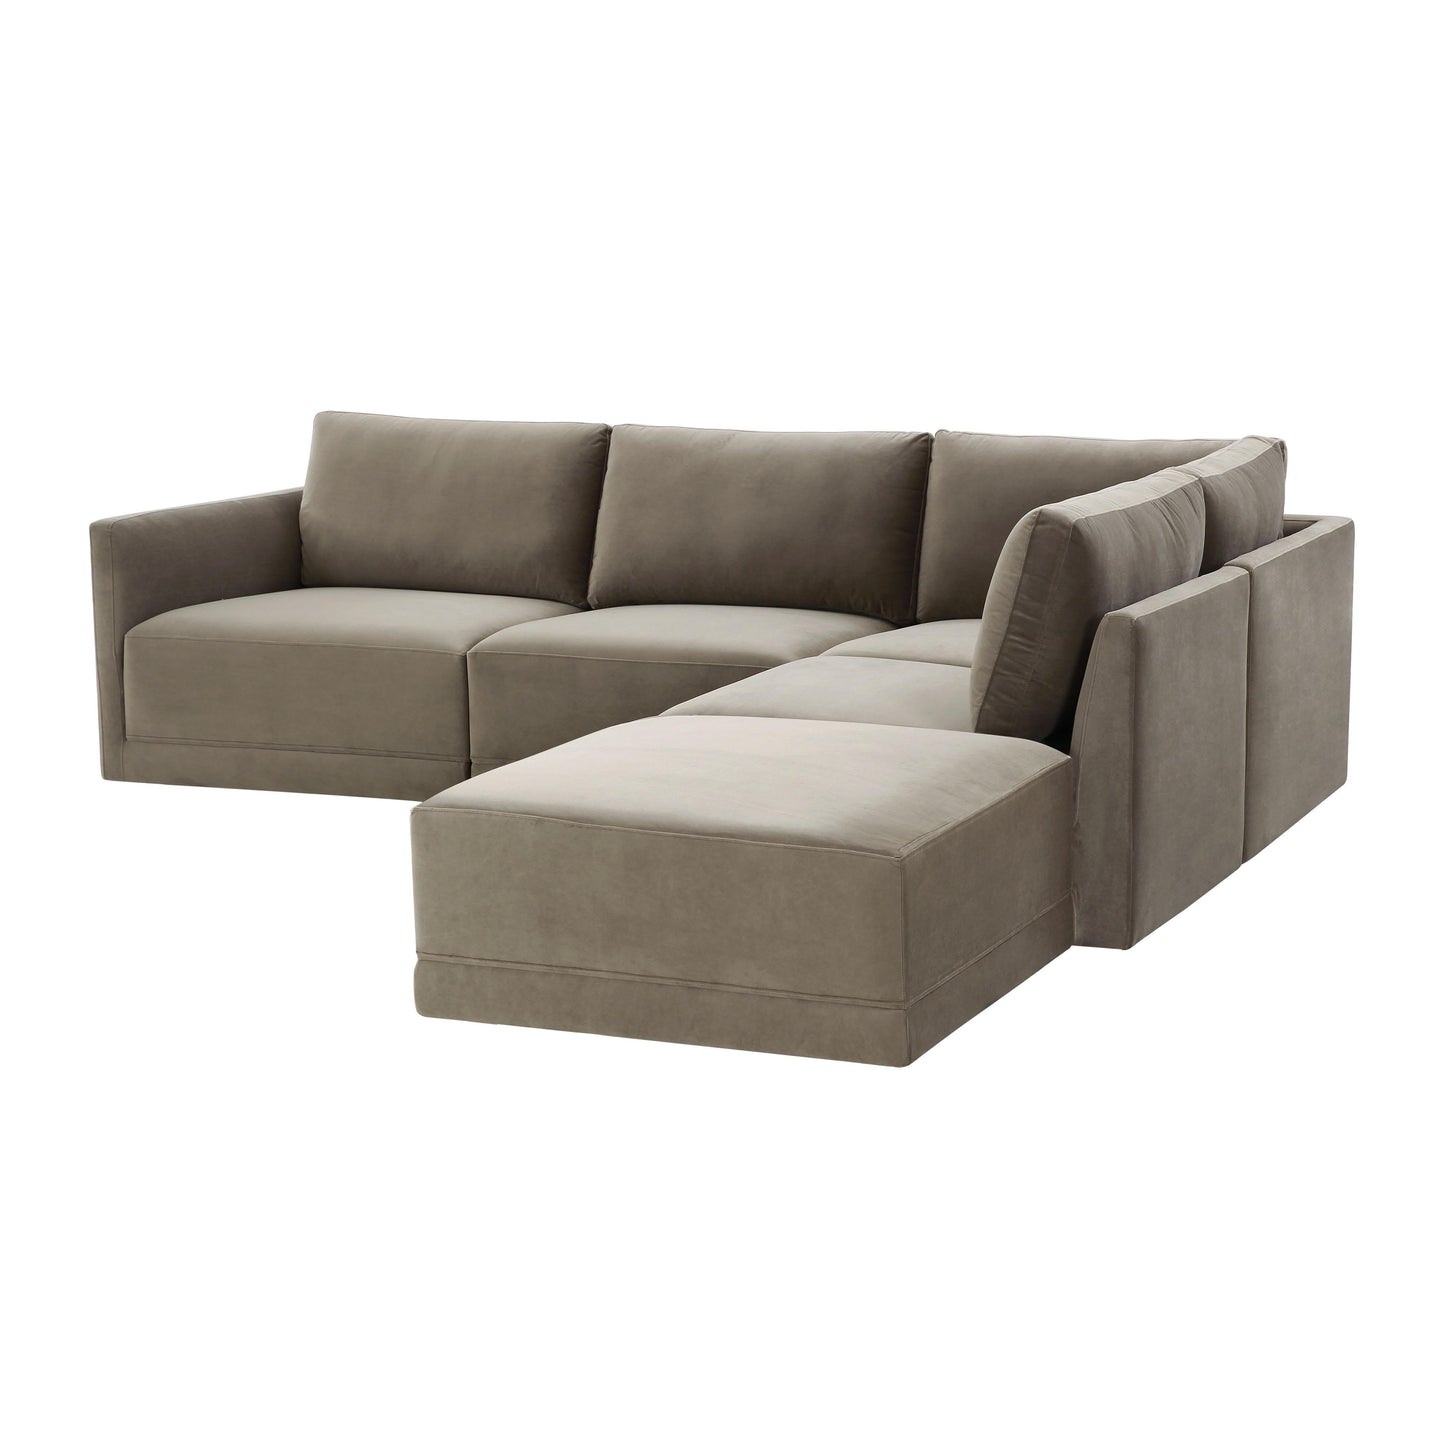 Willow Taupe Modular Raf Sectional by TOV